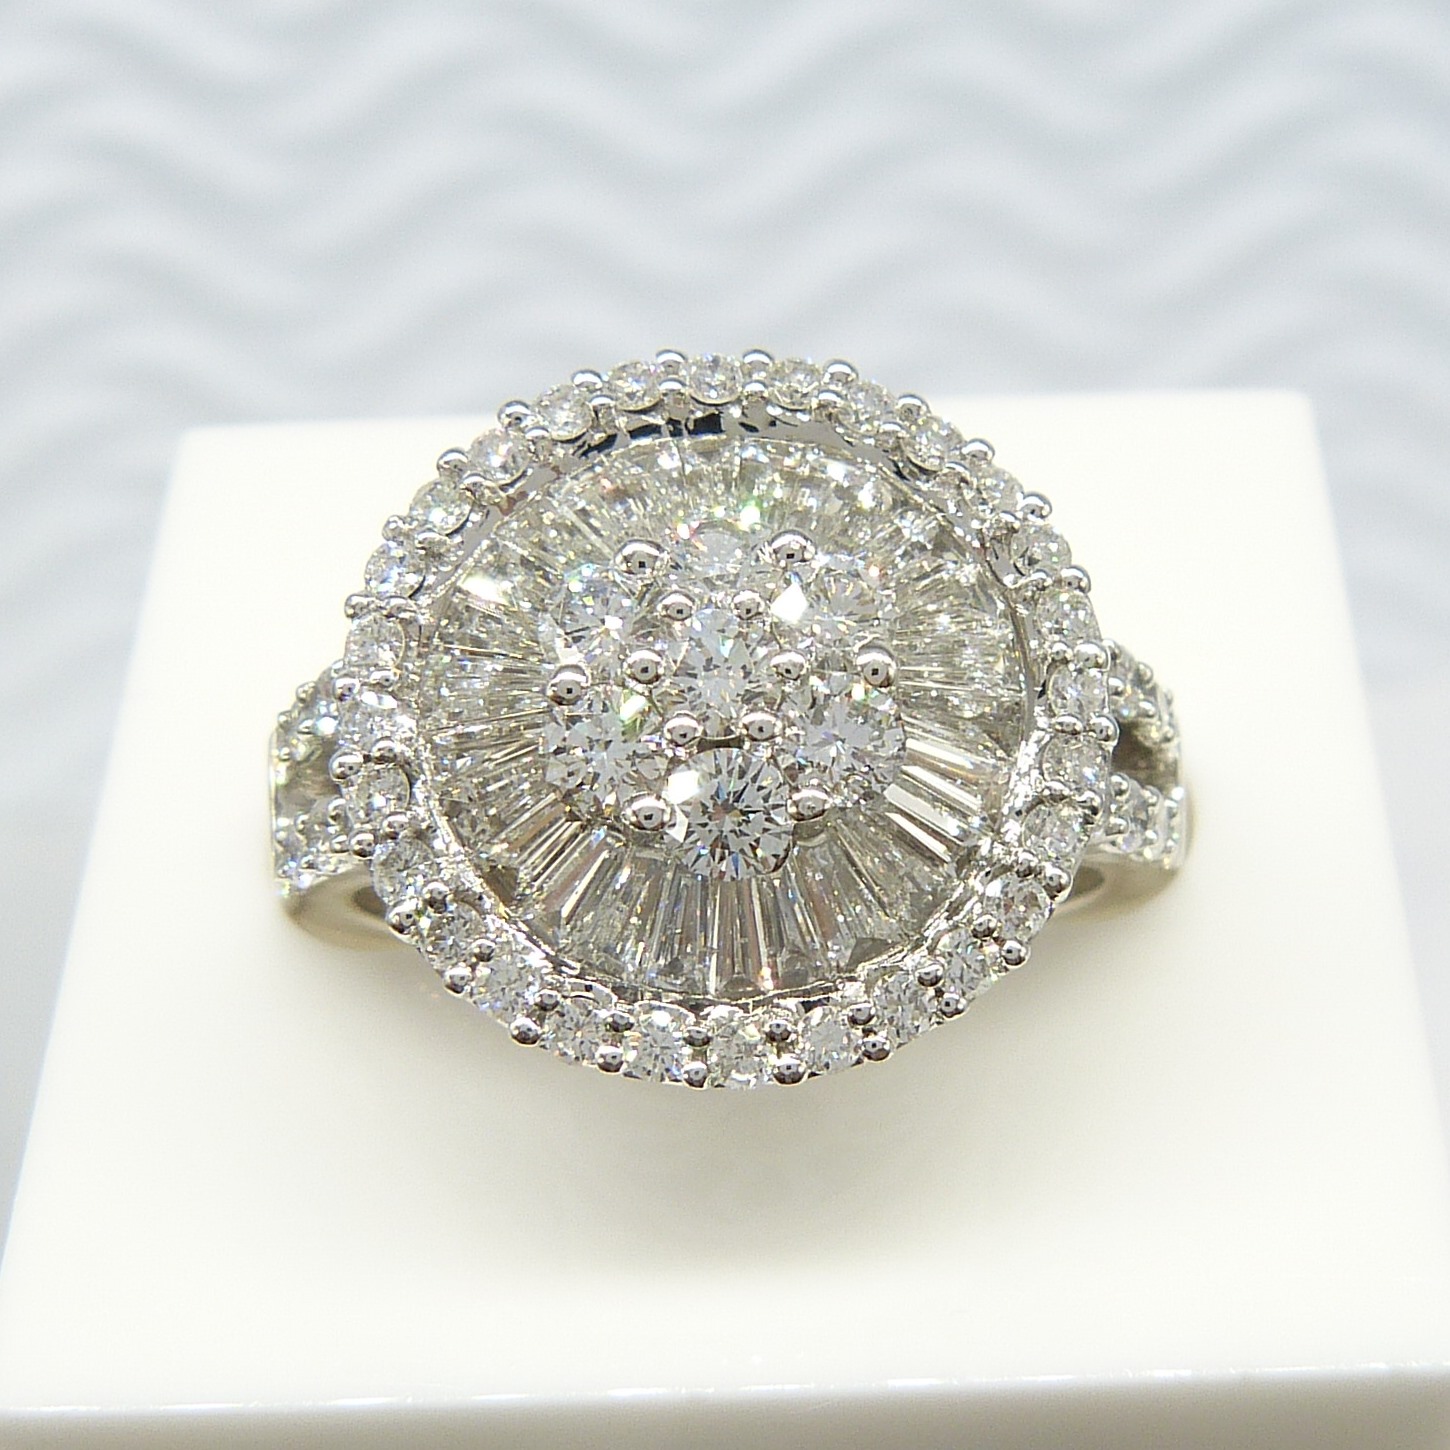 An attractive, certificated, 2.05 carat Diamond cluster ring in 18k white Gold, with Diamond - Image 7 of 10